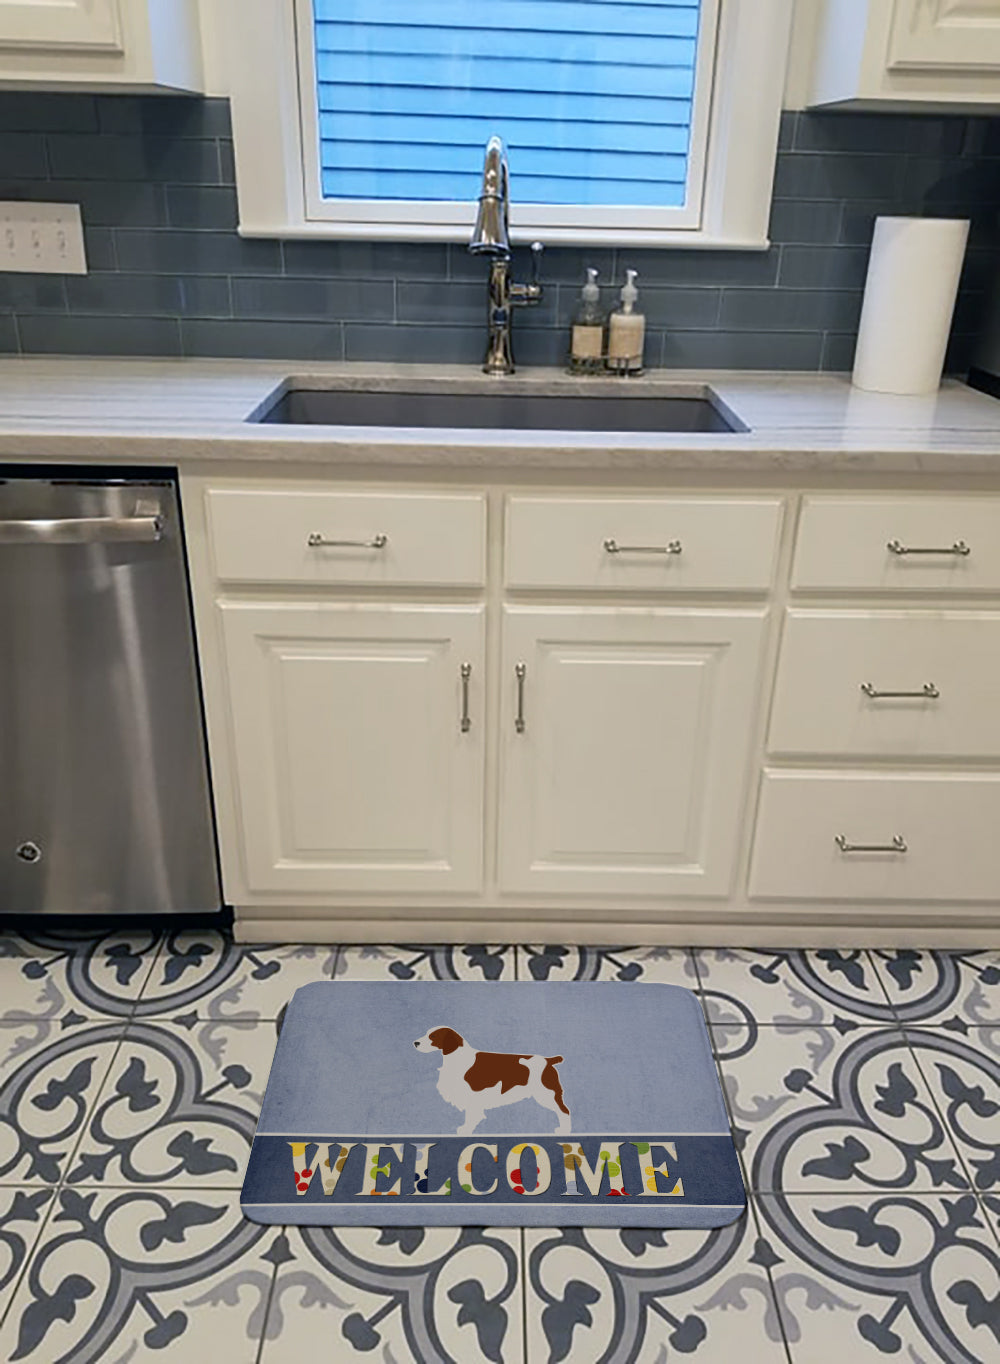 Welsh Springer Spaniel Welcome Machine Washable Memory Foam Mat BB5504RUG - the-store.com